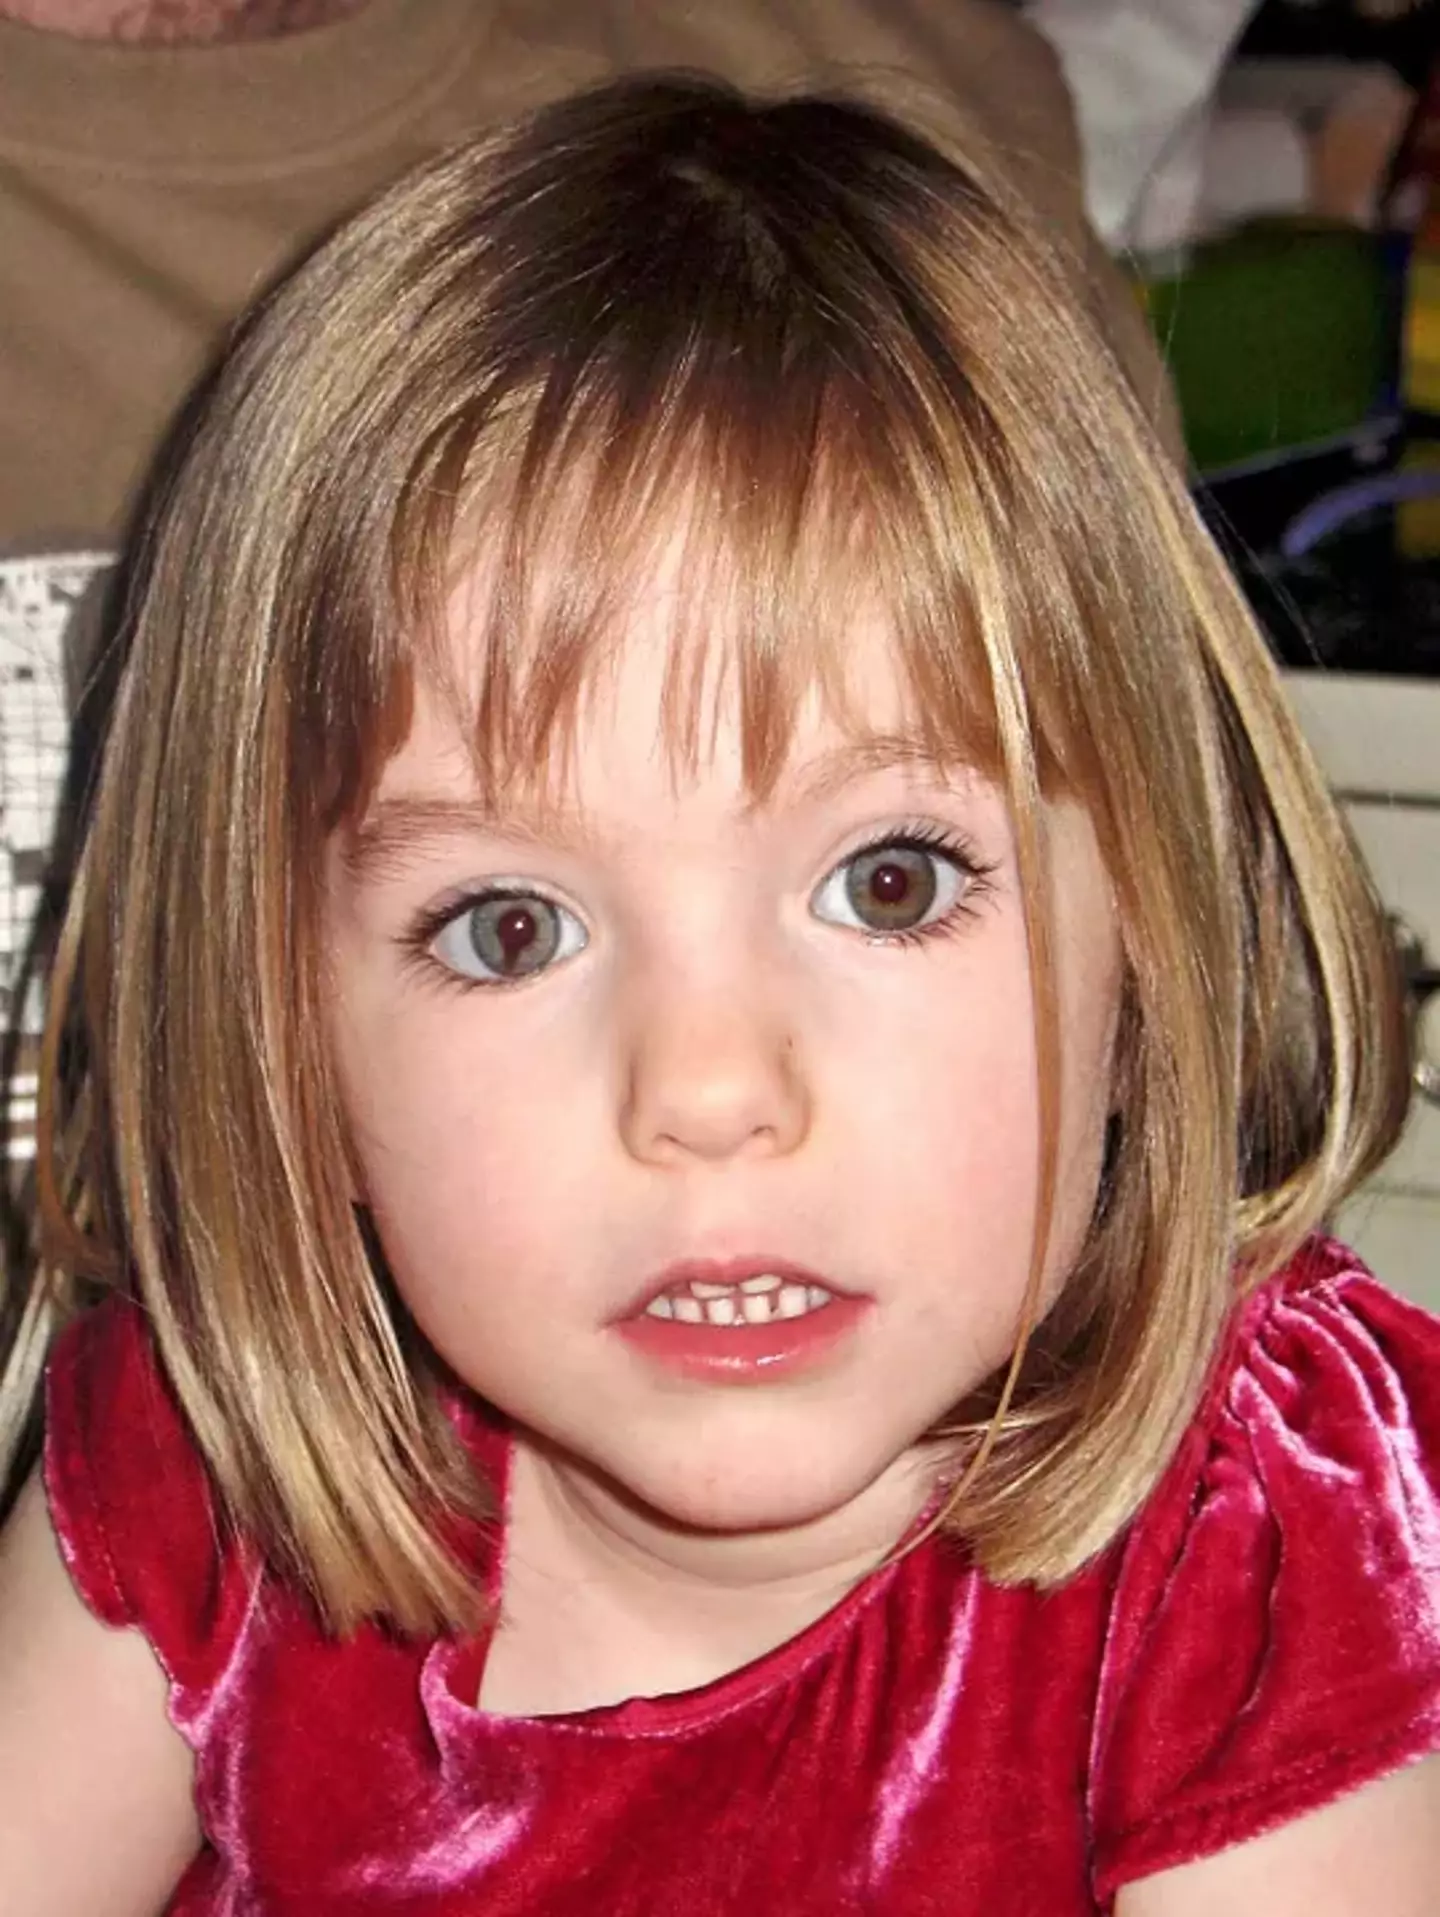 Madeleine McCann has been missing since 2007. (PA)